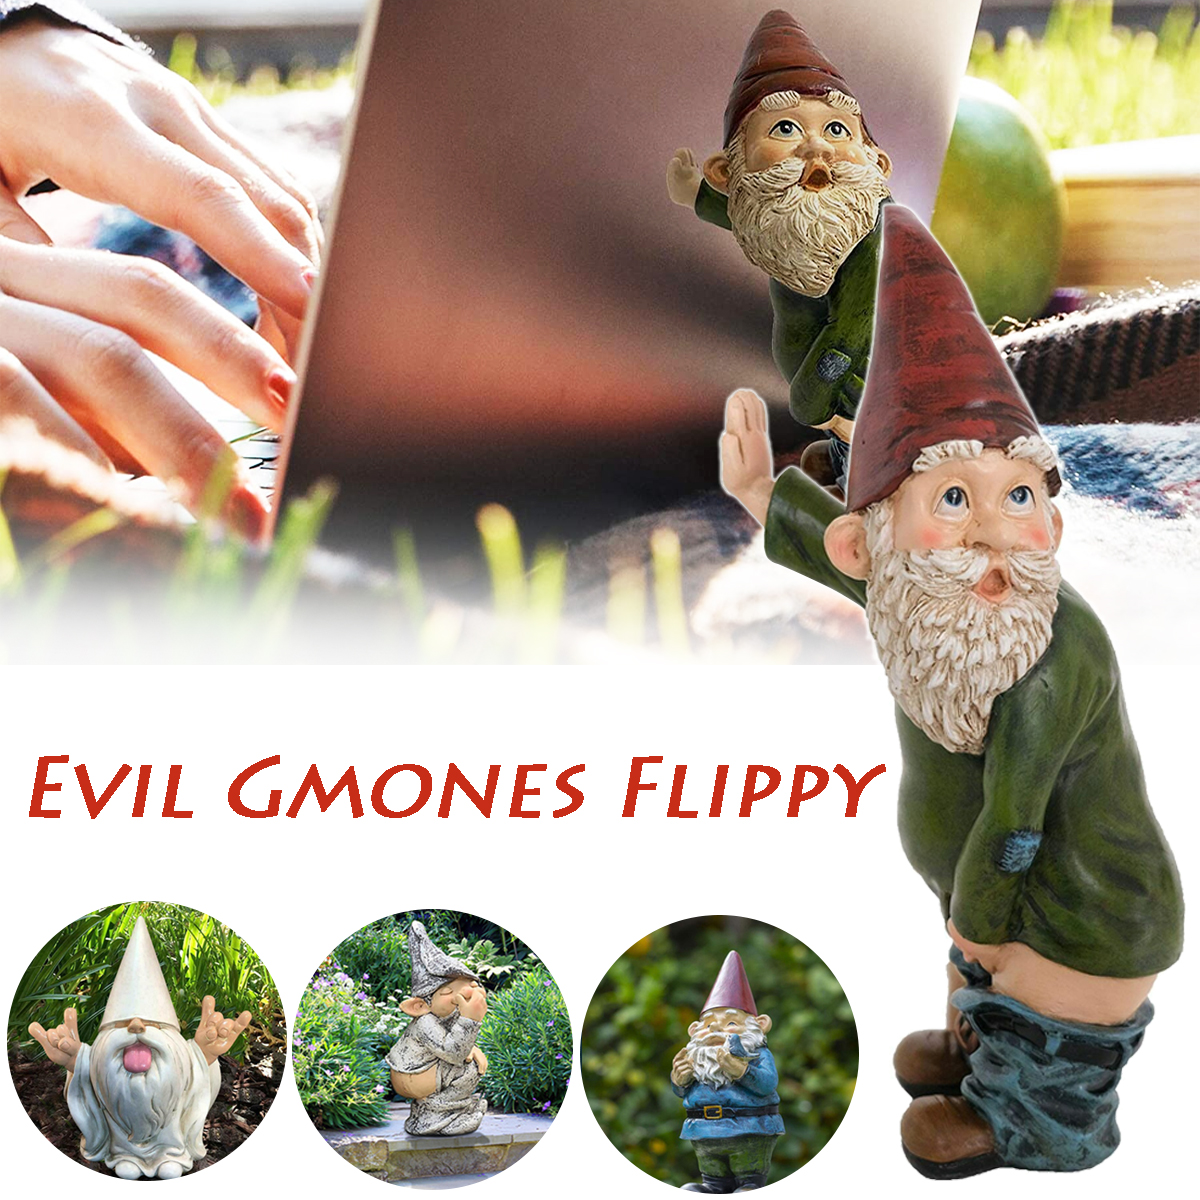 Resin-Funny-Naughty-Garden-Gnome-for-Lawn-Indoor-or-Outdoor-Decorations-1780900-2